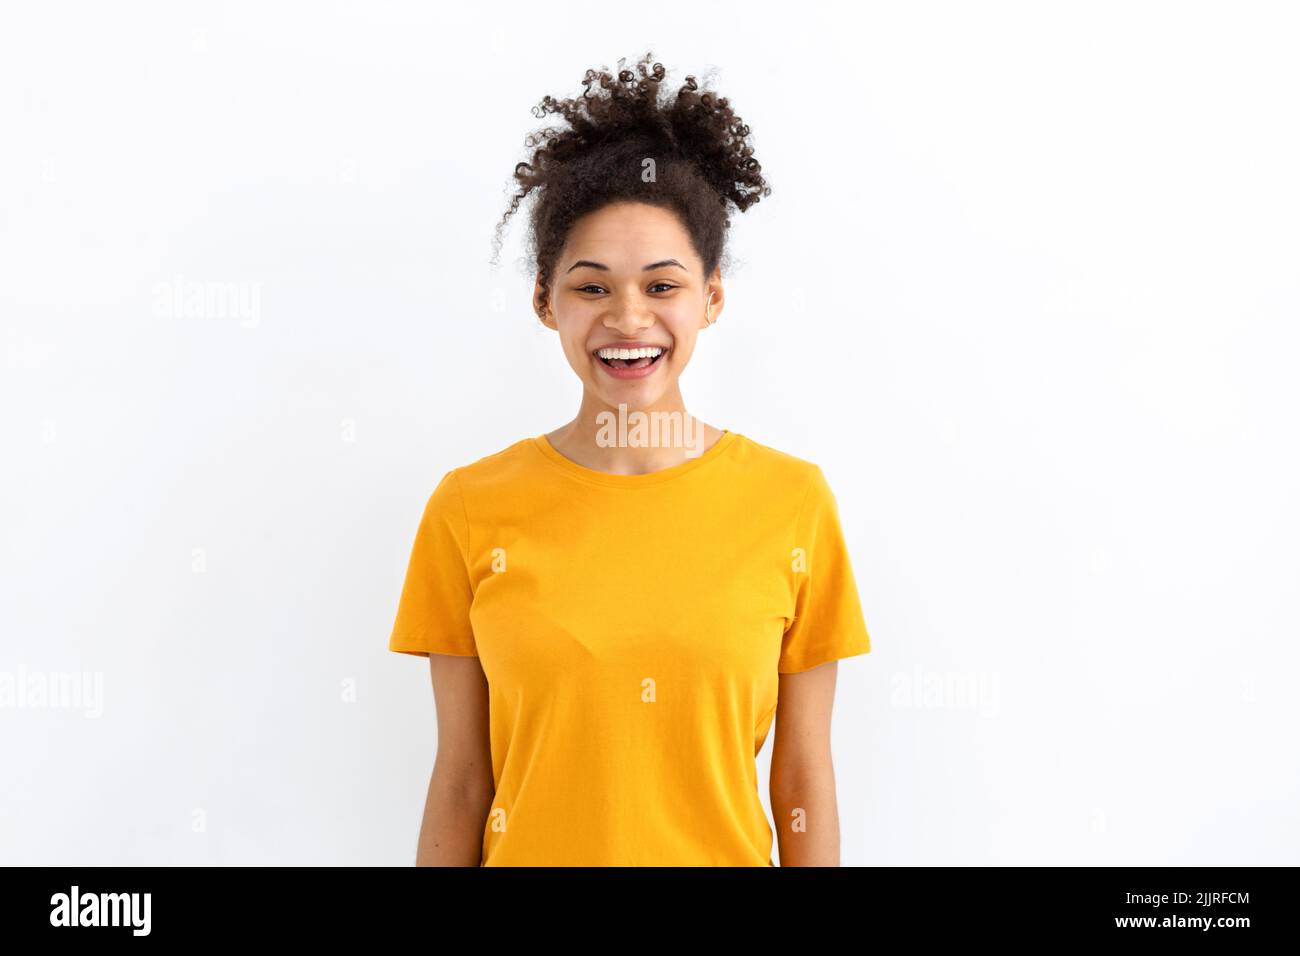 Portrait young funny positive smiling woman dressed in yellow t shirt on white background good mood concept Stock Photo